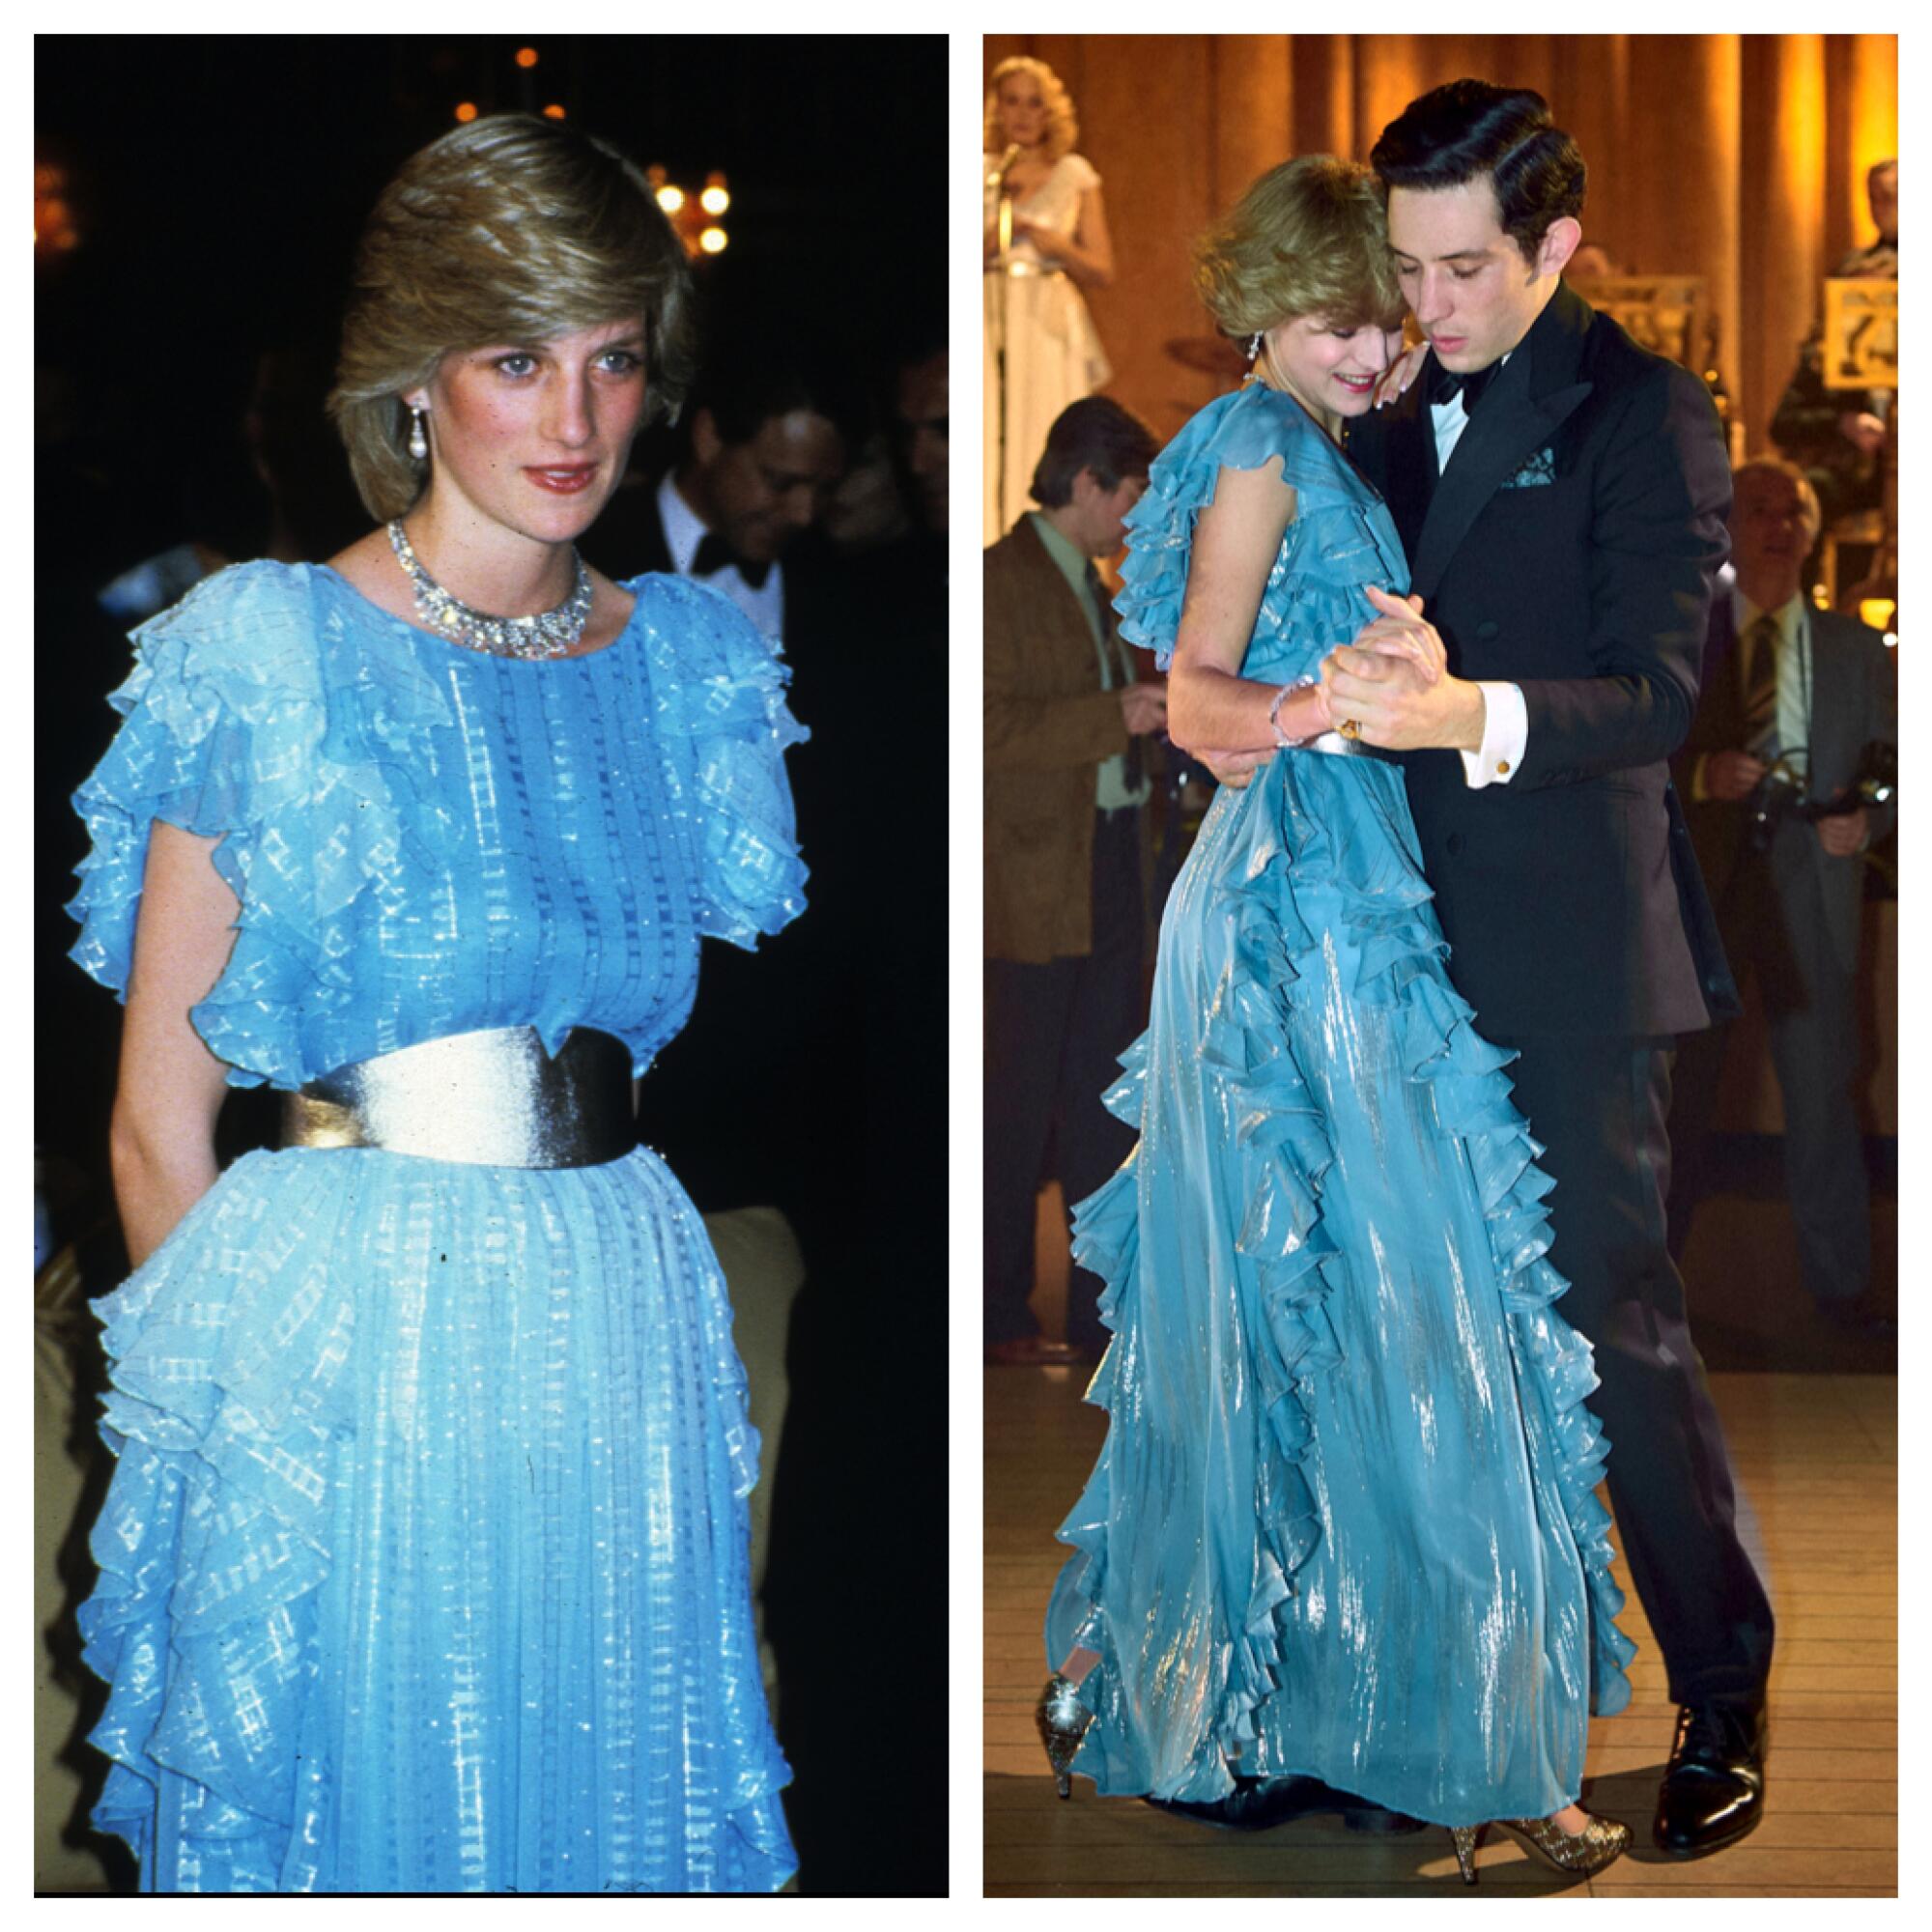 Diana, Princess of Wales, and actress Emma Corrin, who portrays her in "The Crown," wear the same long blue gown.